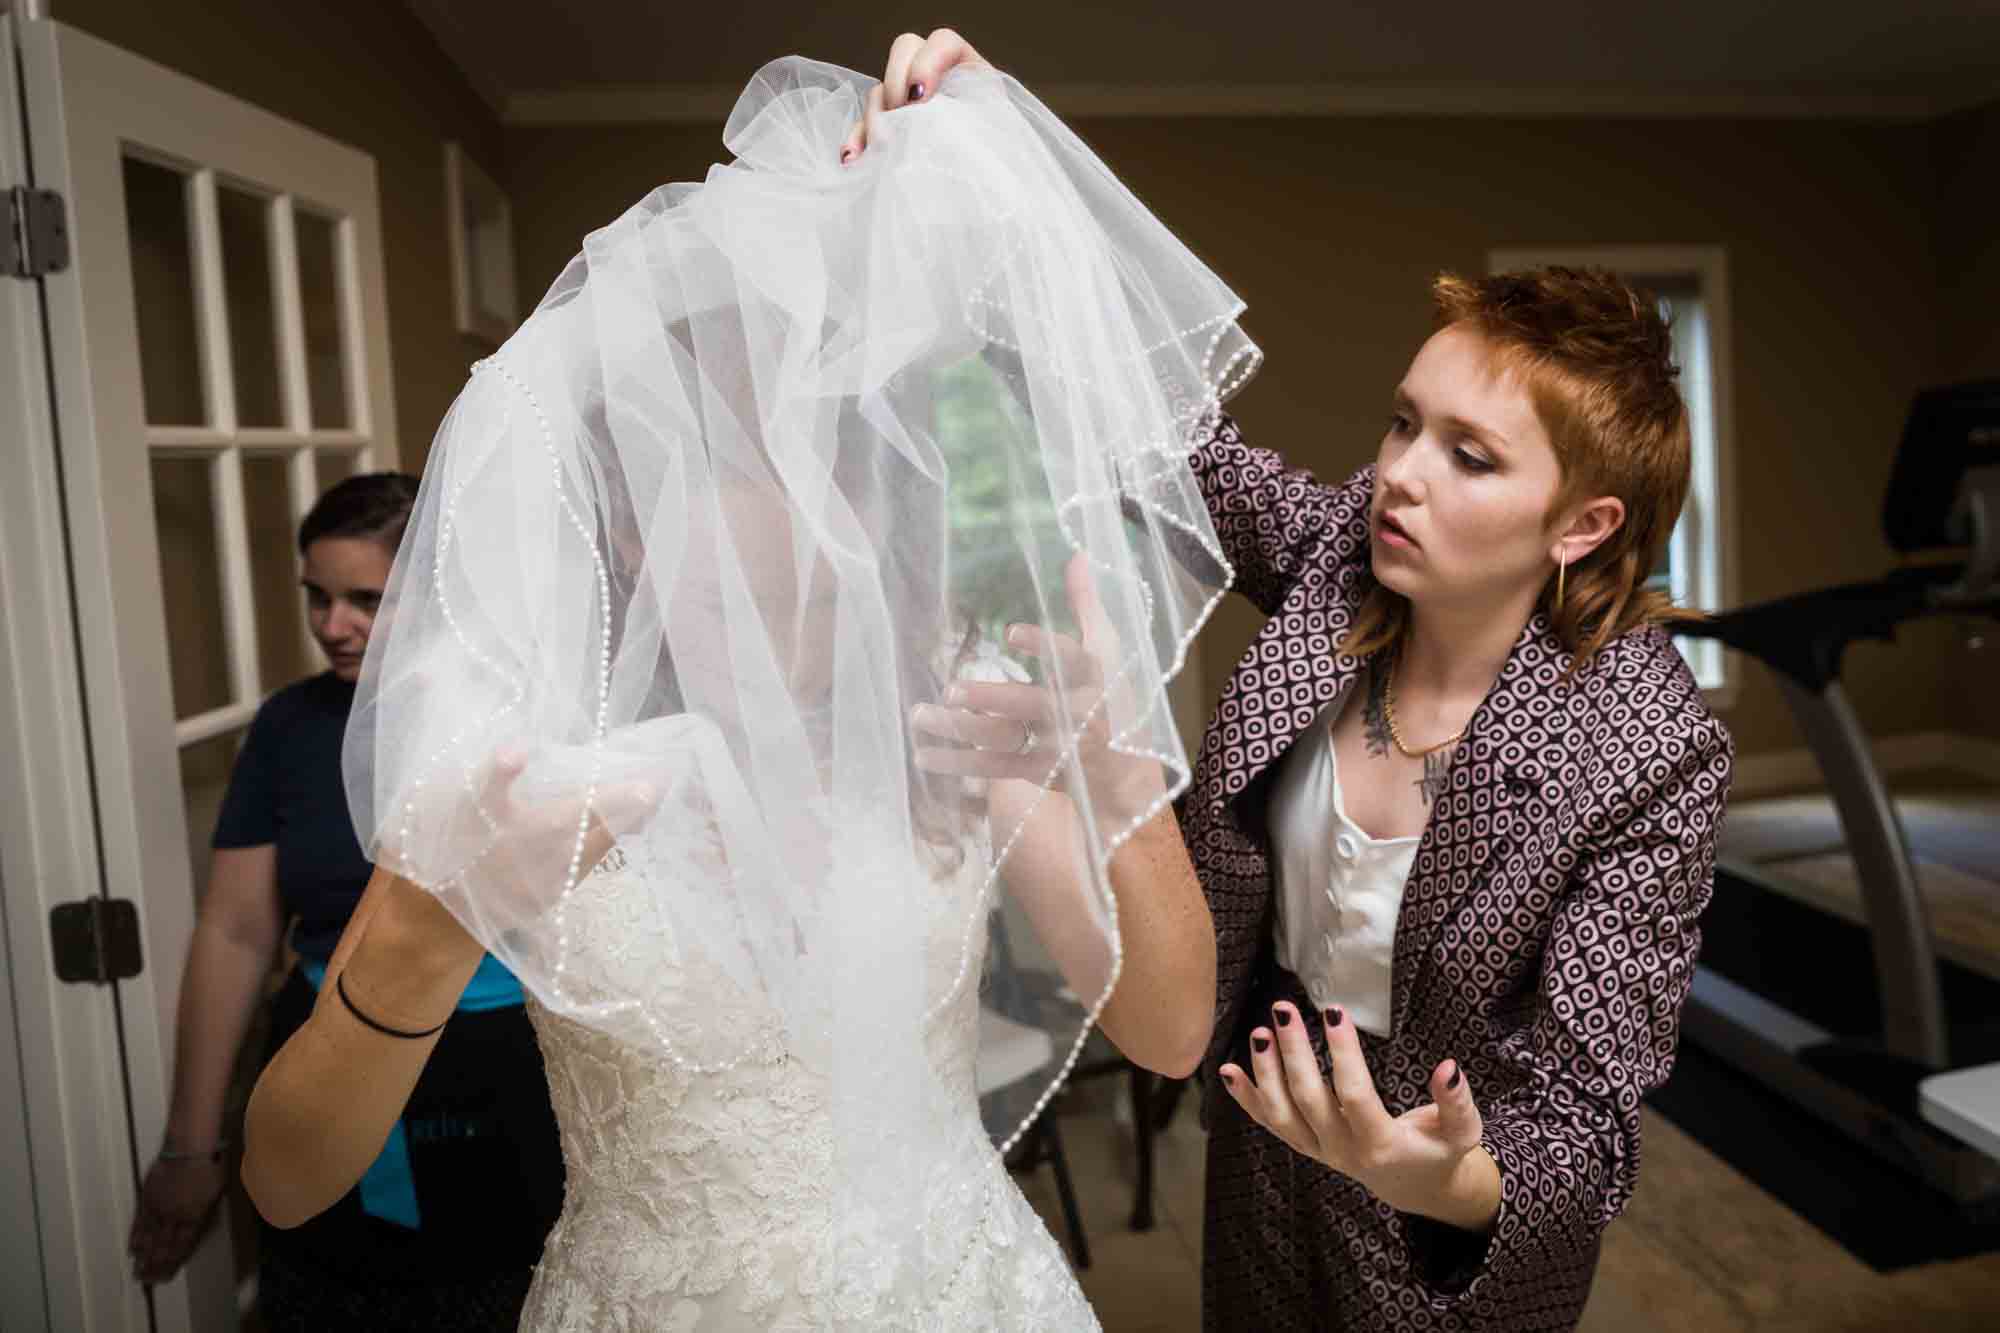 Woman helping bride with veil for an article on backyard wedding tips